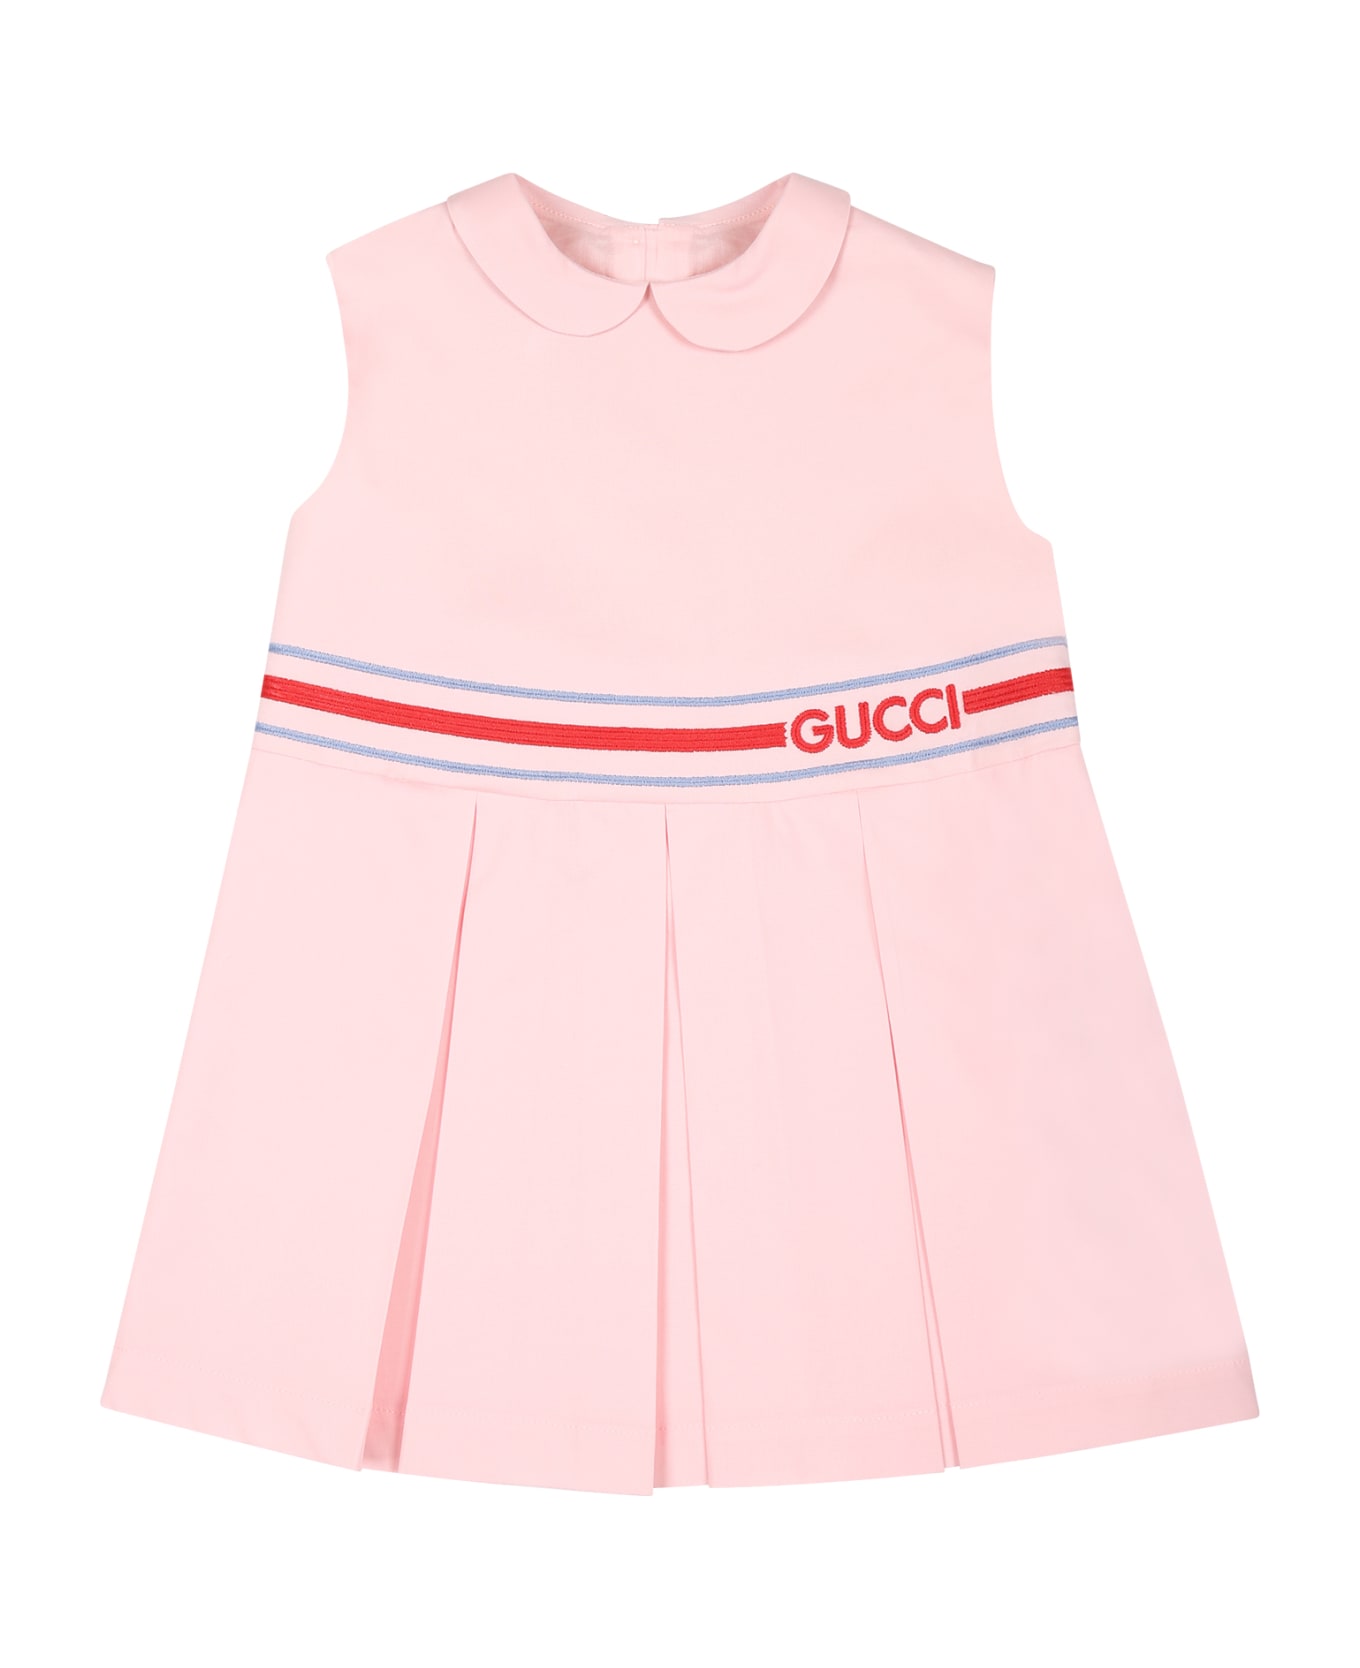 Gucci Pink Dress For Baby Girl With Logo - Pink ウェア